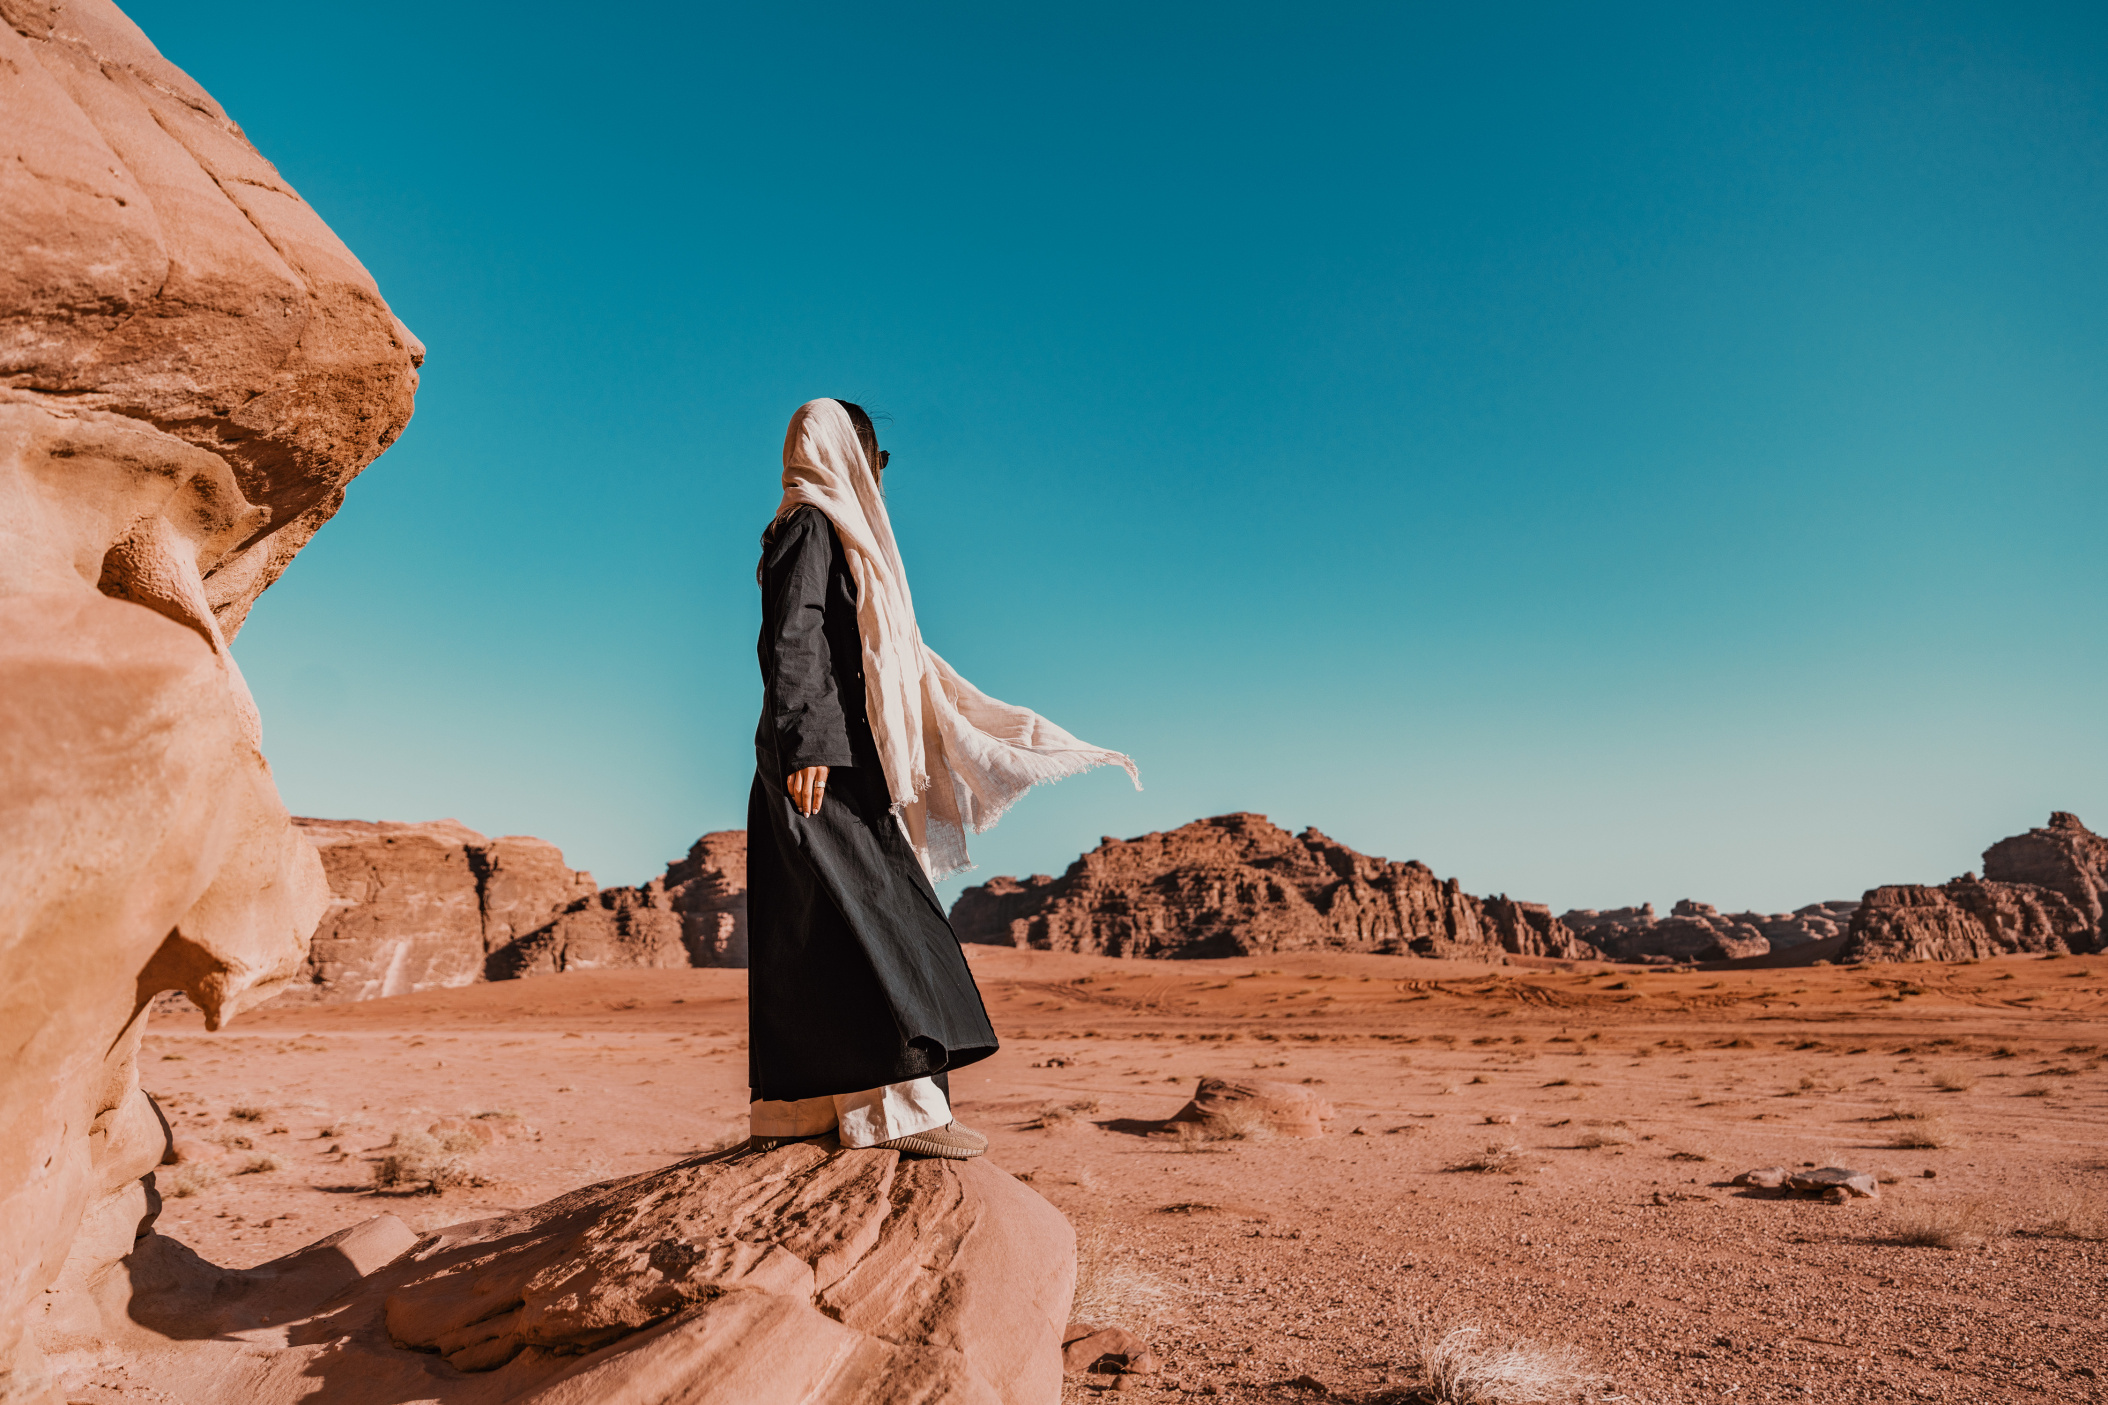 NEOM, SAUDI ARABIA – DECEMBER 9: Woman looking over of Hisma Desert from a large sandstone rock on December 09, 2022, in NEOM, Saudi Arabia.